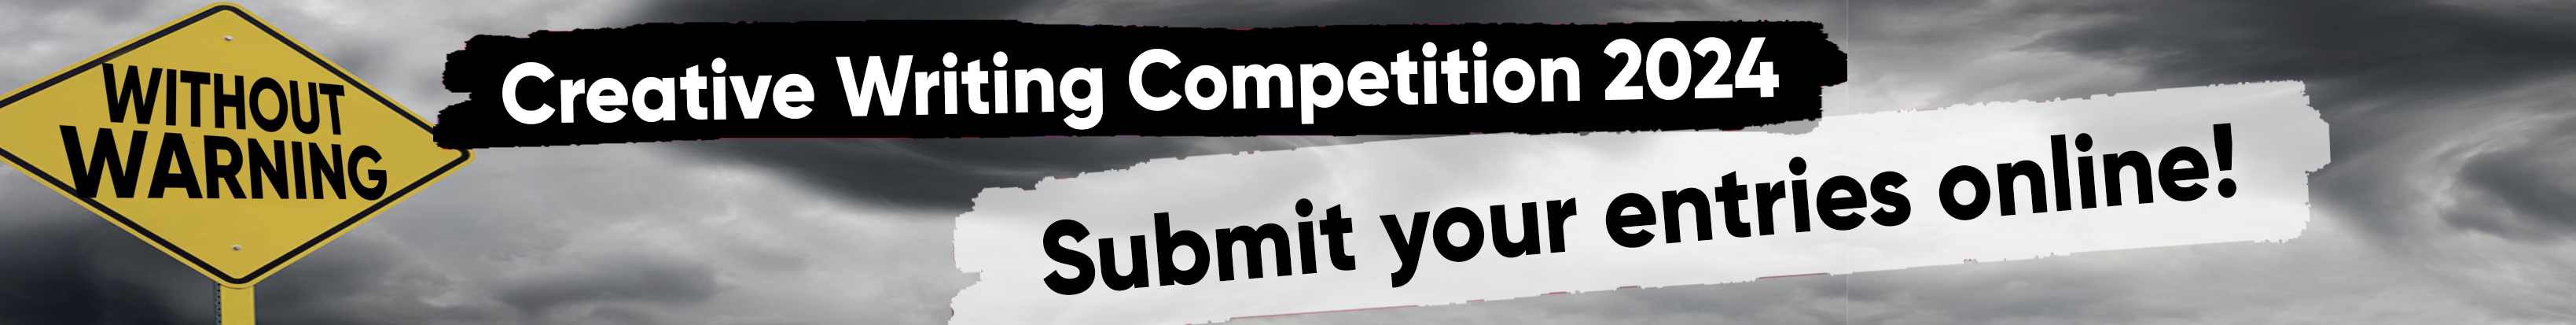 Creative Writing Competition 2024 - Submit your entries online.